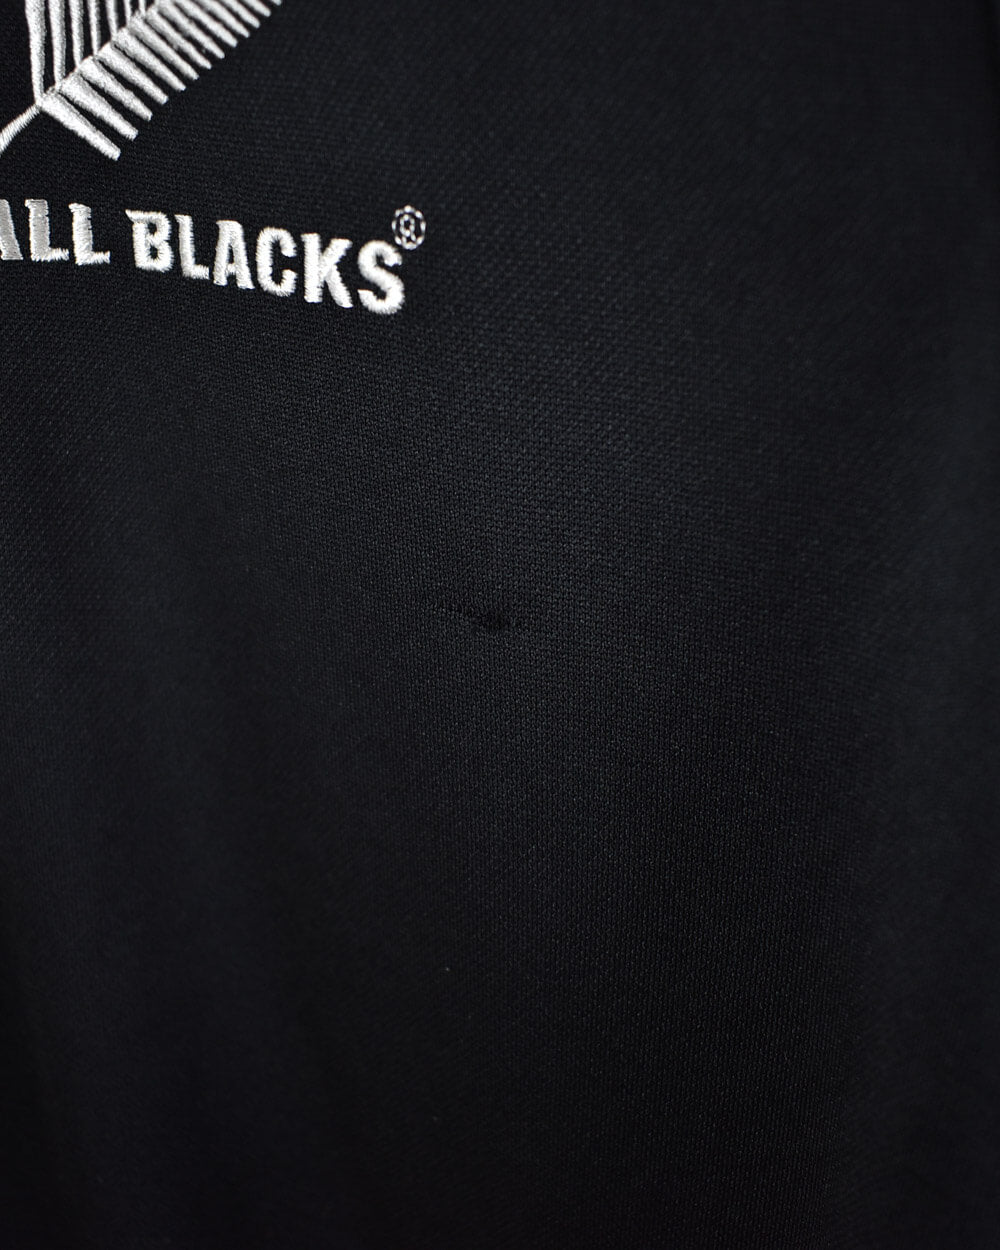 Adidas New Zealand All Blacks Tracksuit Top - Large - Domno Vintage 90s, 80s, 00s Retro and Vintage Clothing 